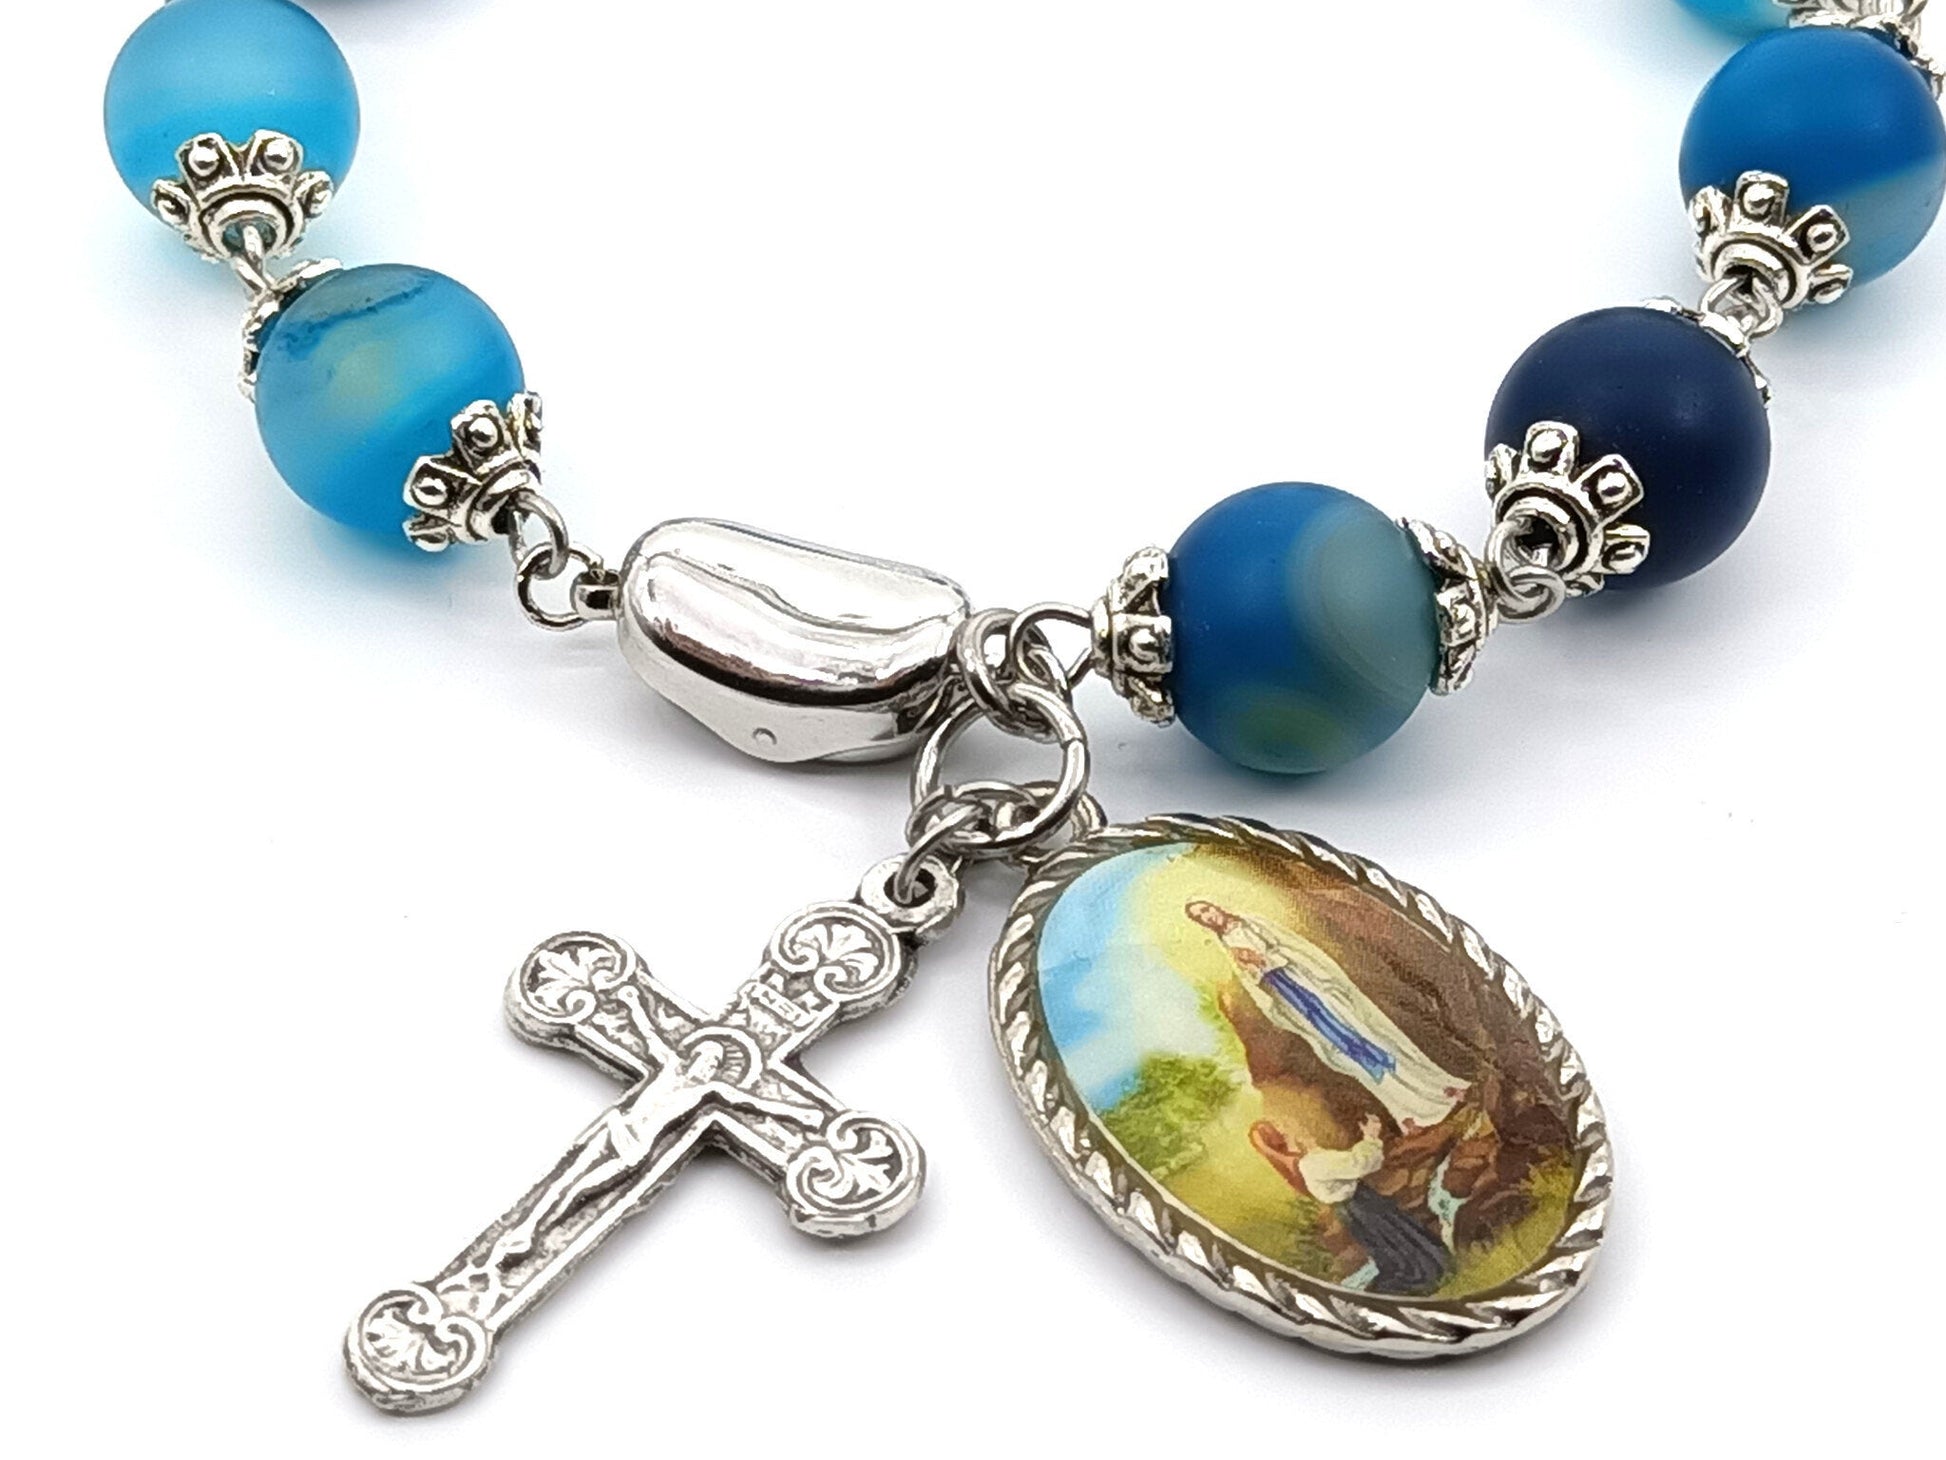 Our Lady of Lourdes unique rosary beads single decade bracelet with blue gemstone beads with silver crucifix, picture medal and 925 silver clasp.